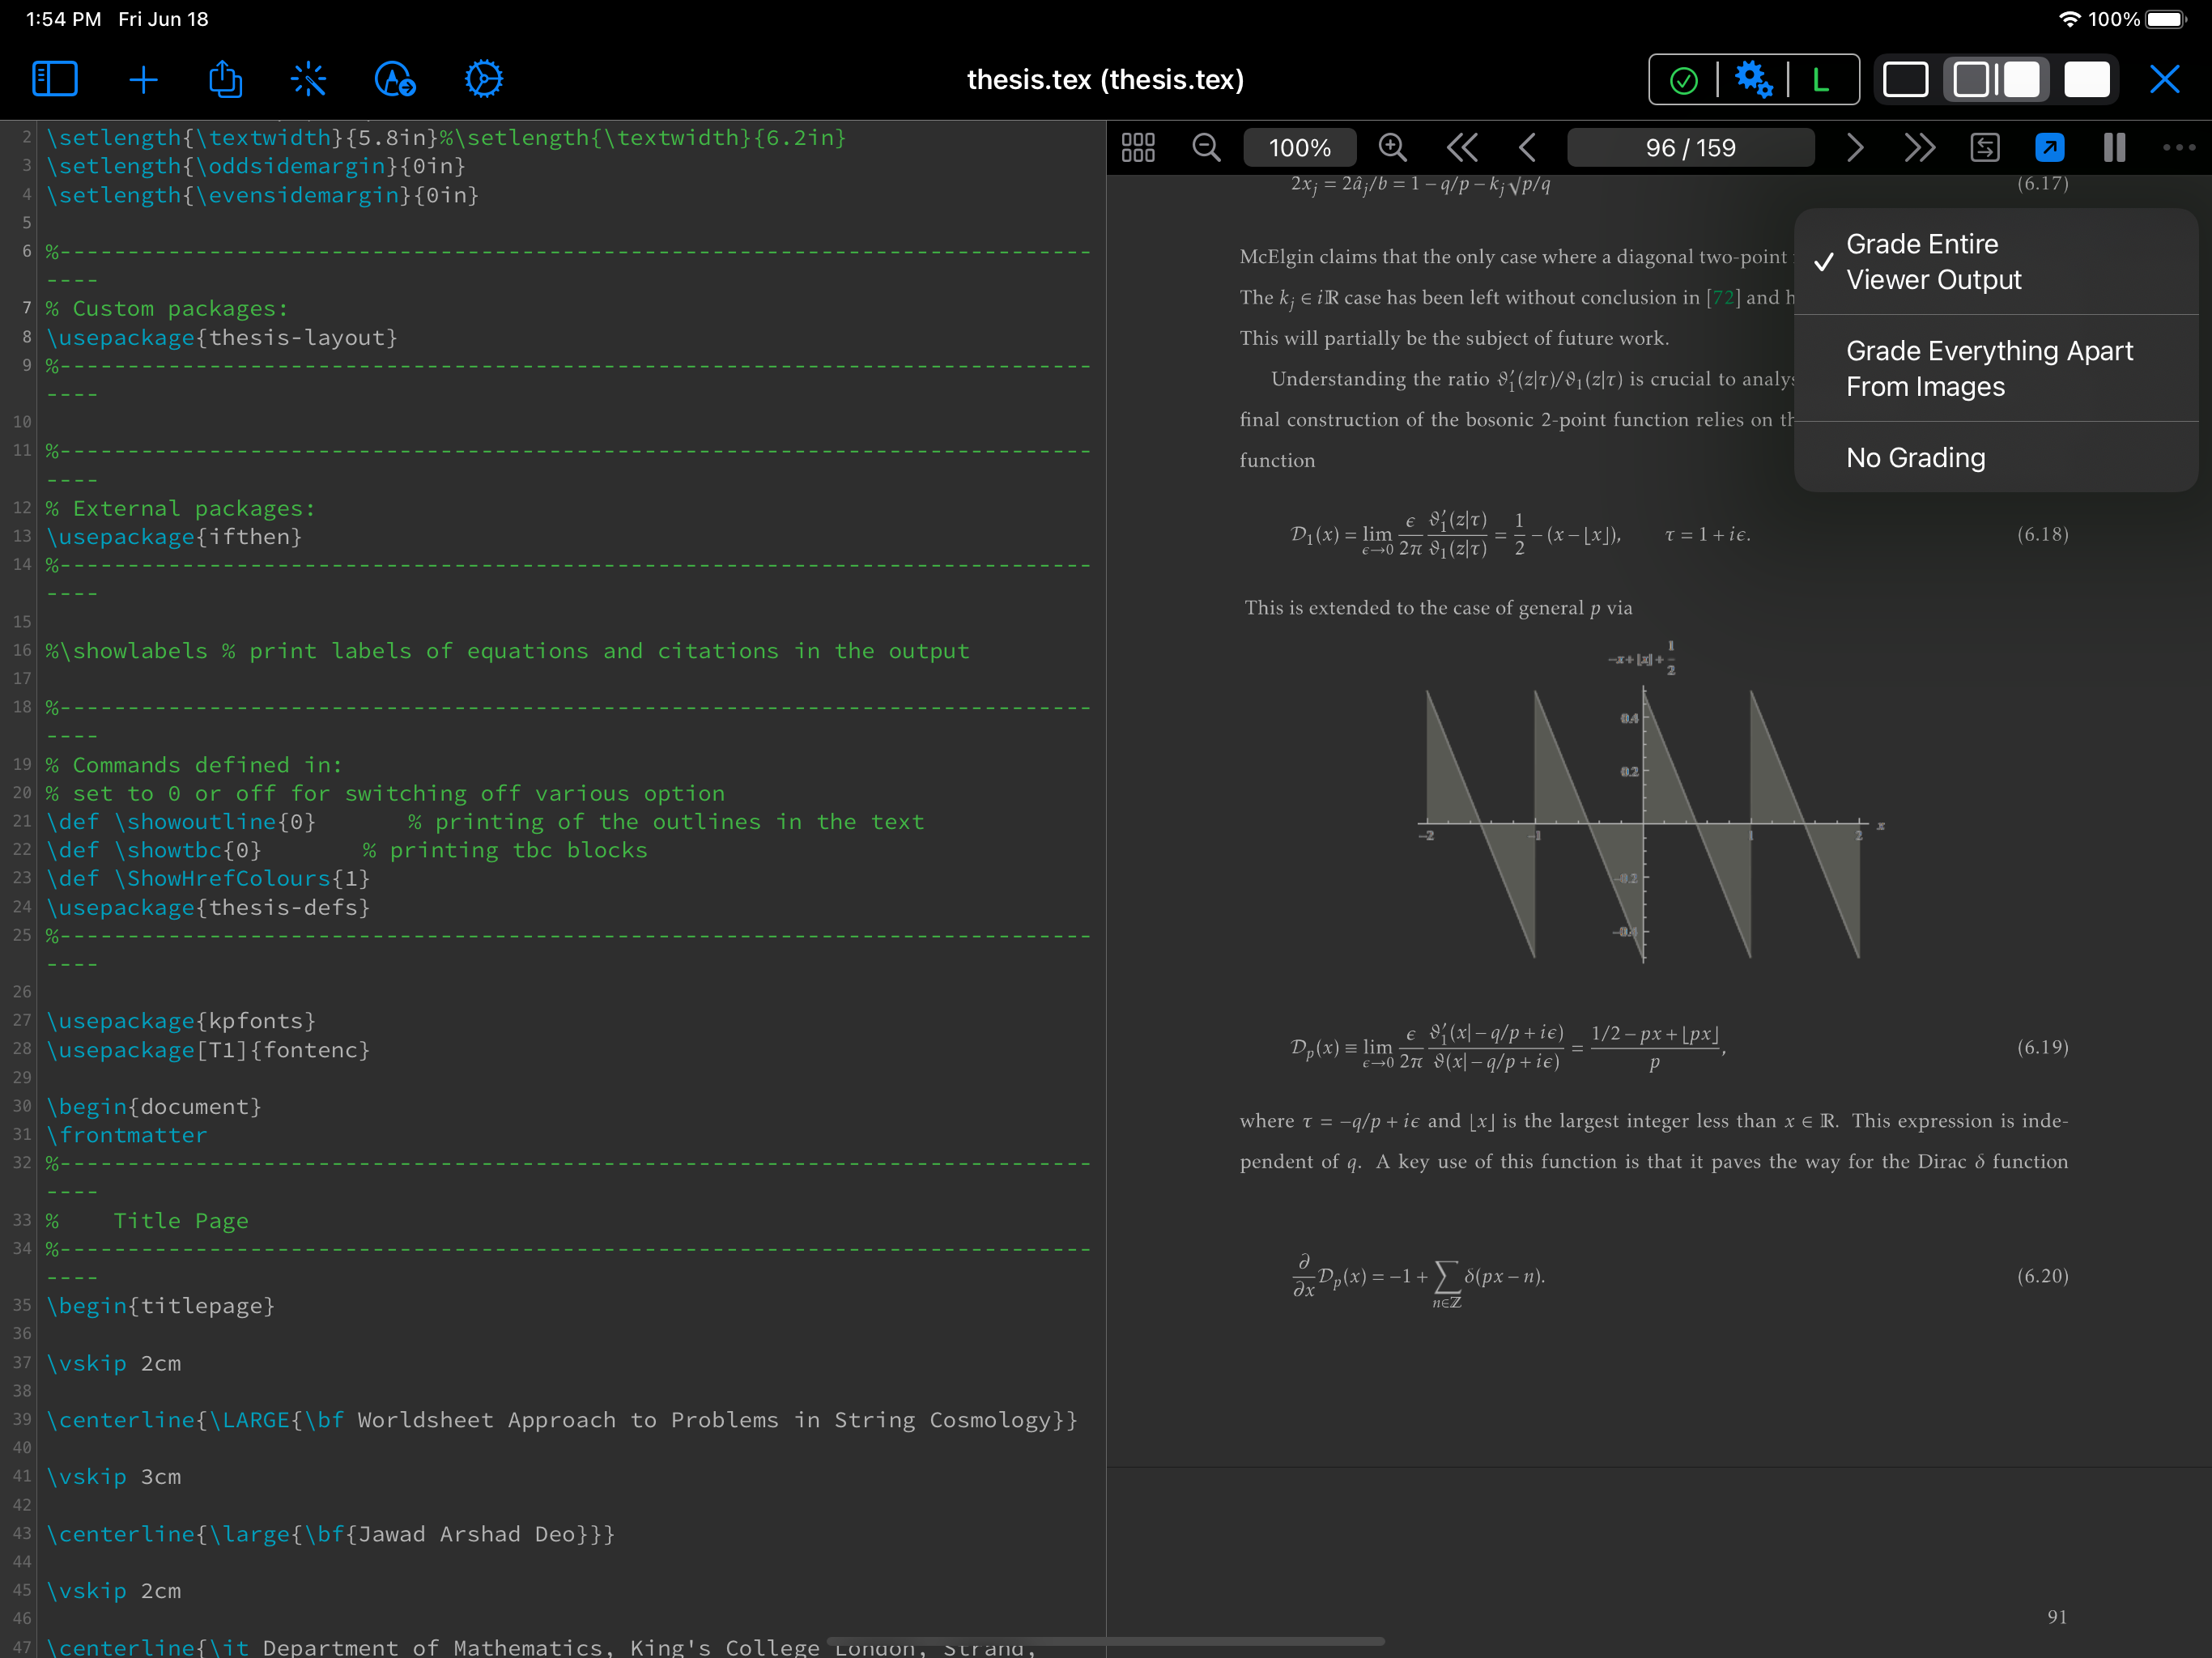 docs/apps/workspace/document-viewer/grading/workspace-grading-options-2-dark-mode_ios_ipad.png